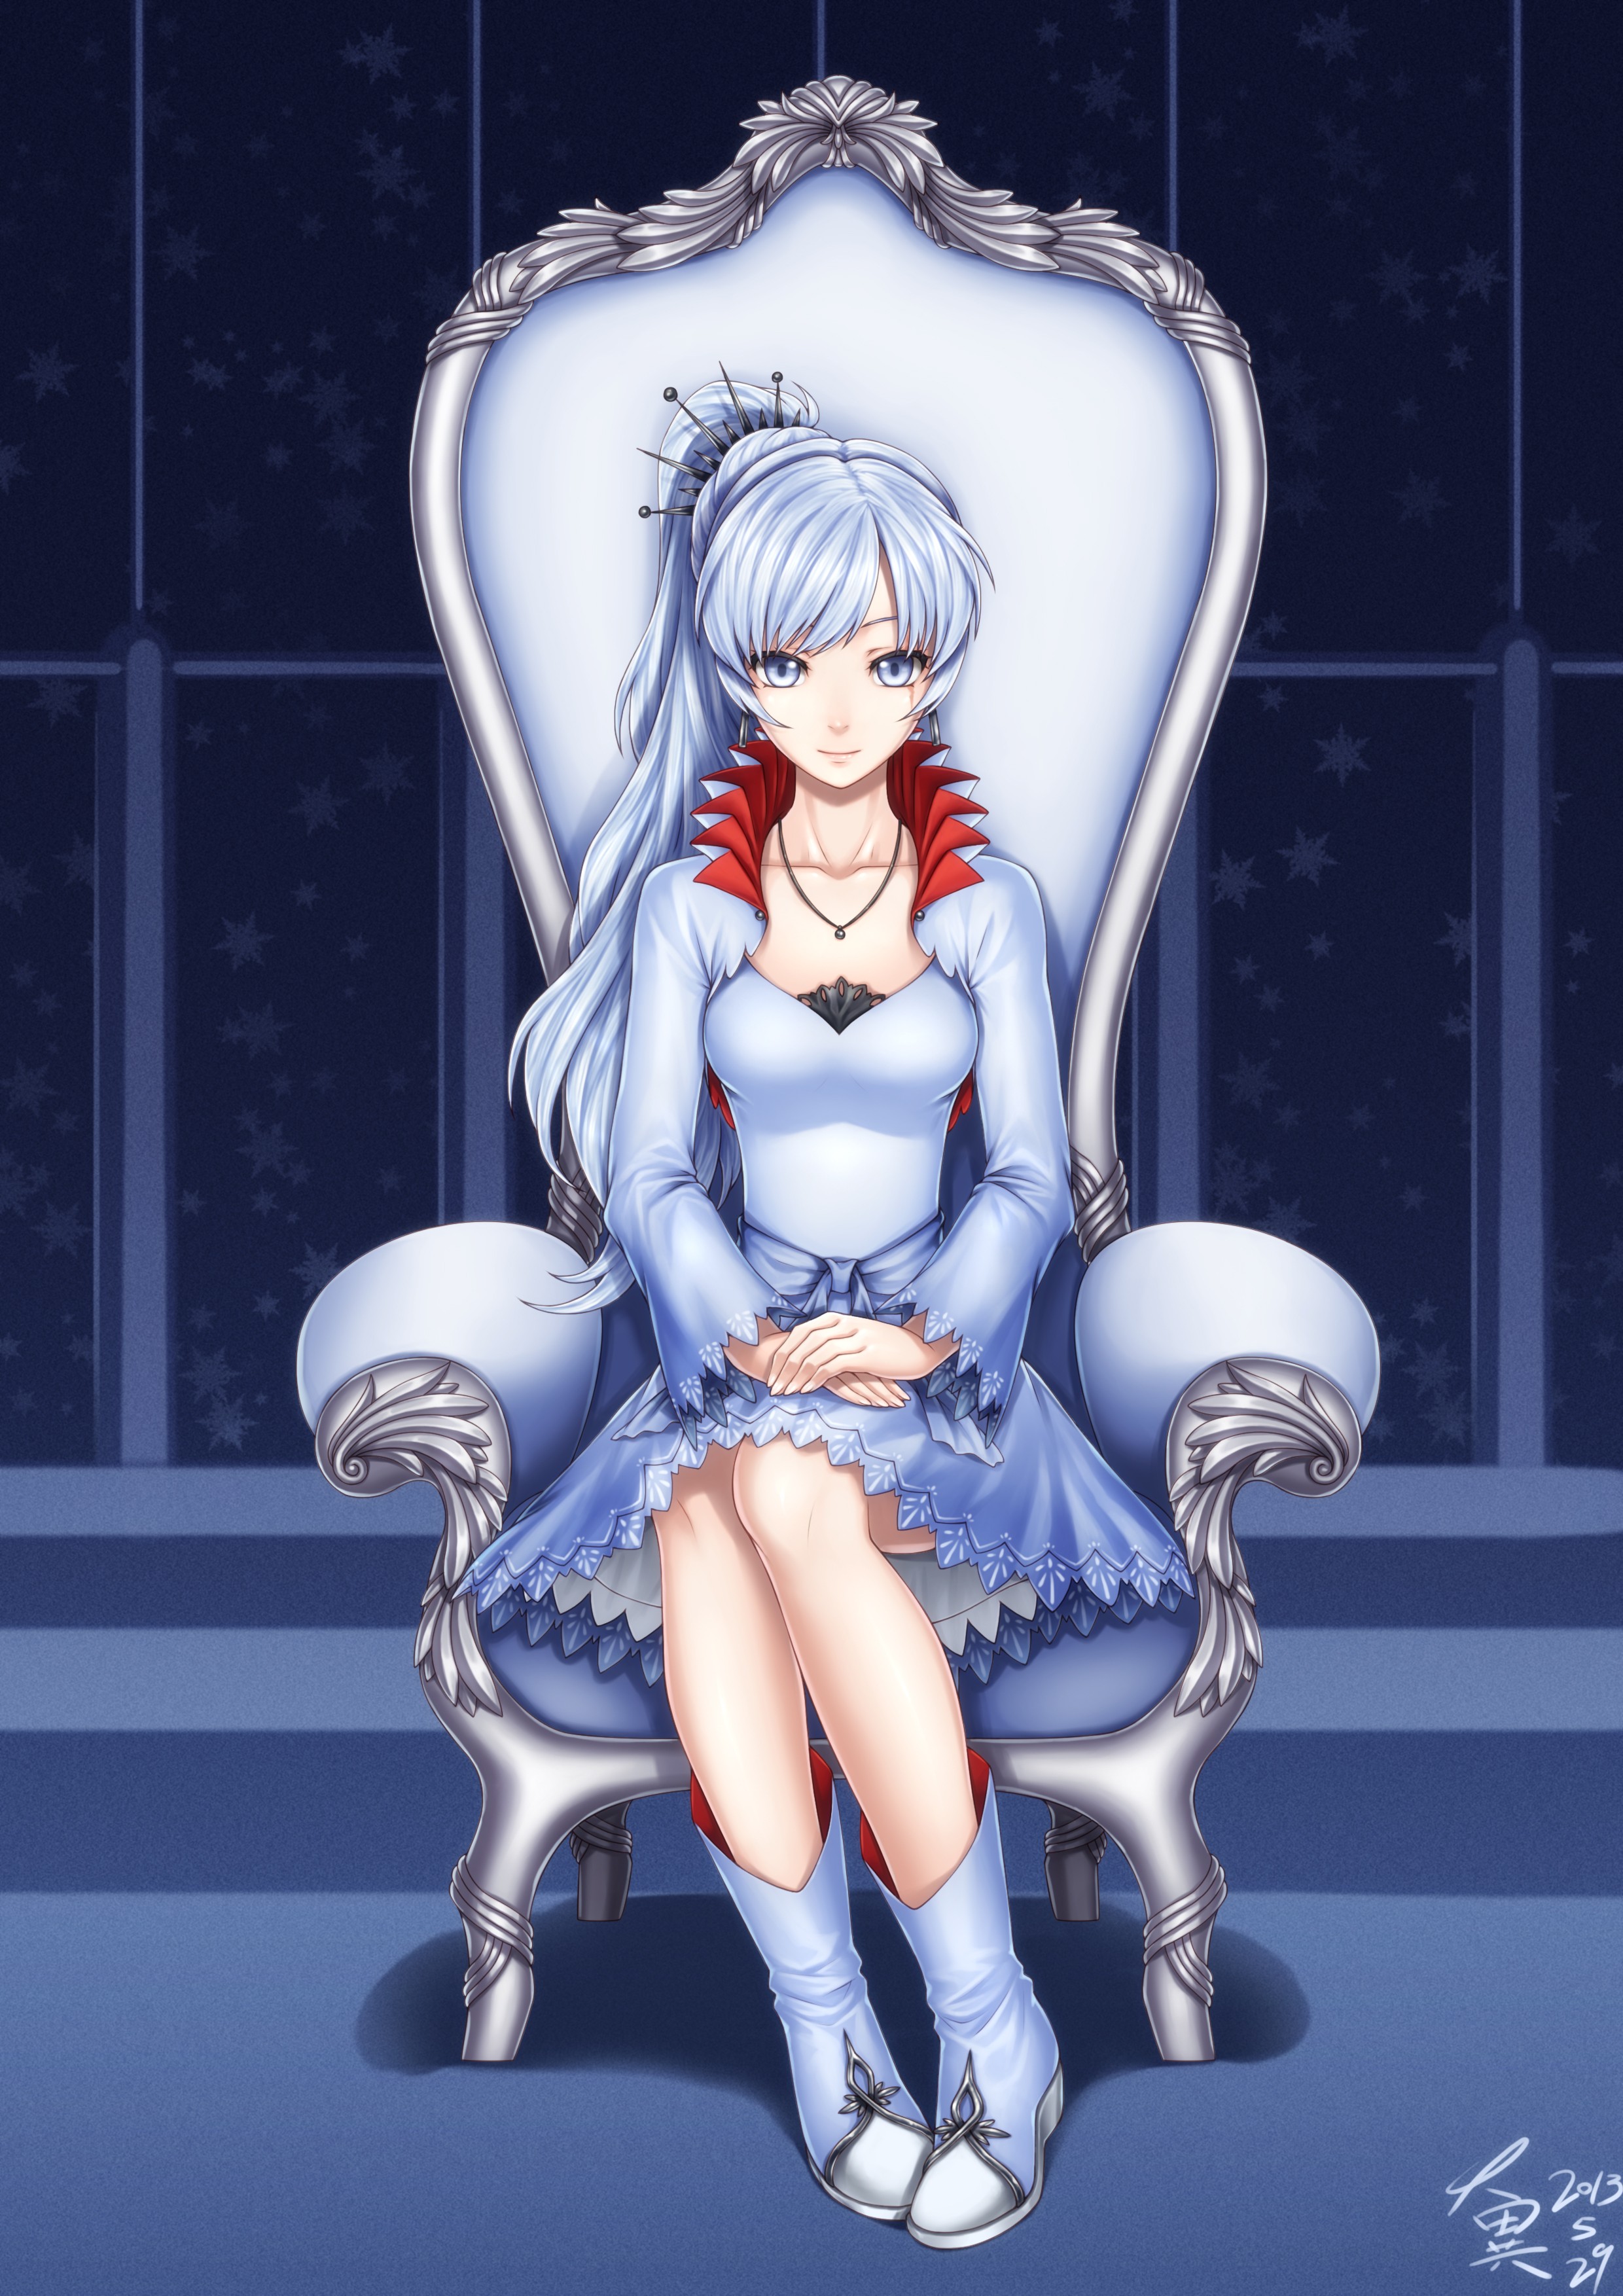 Anime 2480x3508 anime anime girls long hair blue hair blue eyes Weiss Schnee RWBY Pixiv knees together watermarked sitting dress